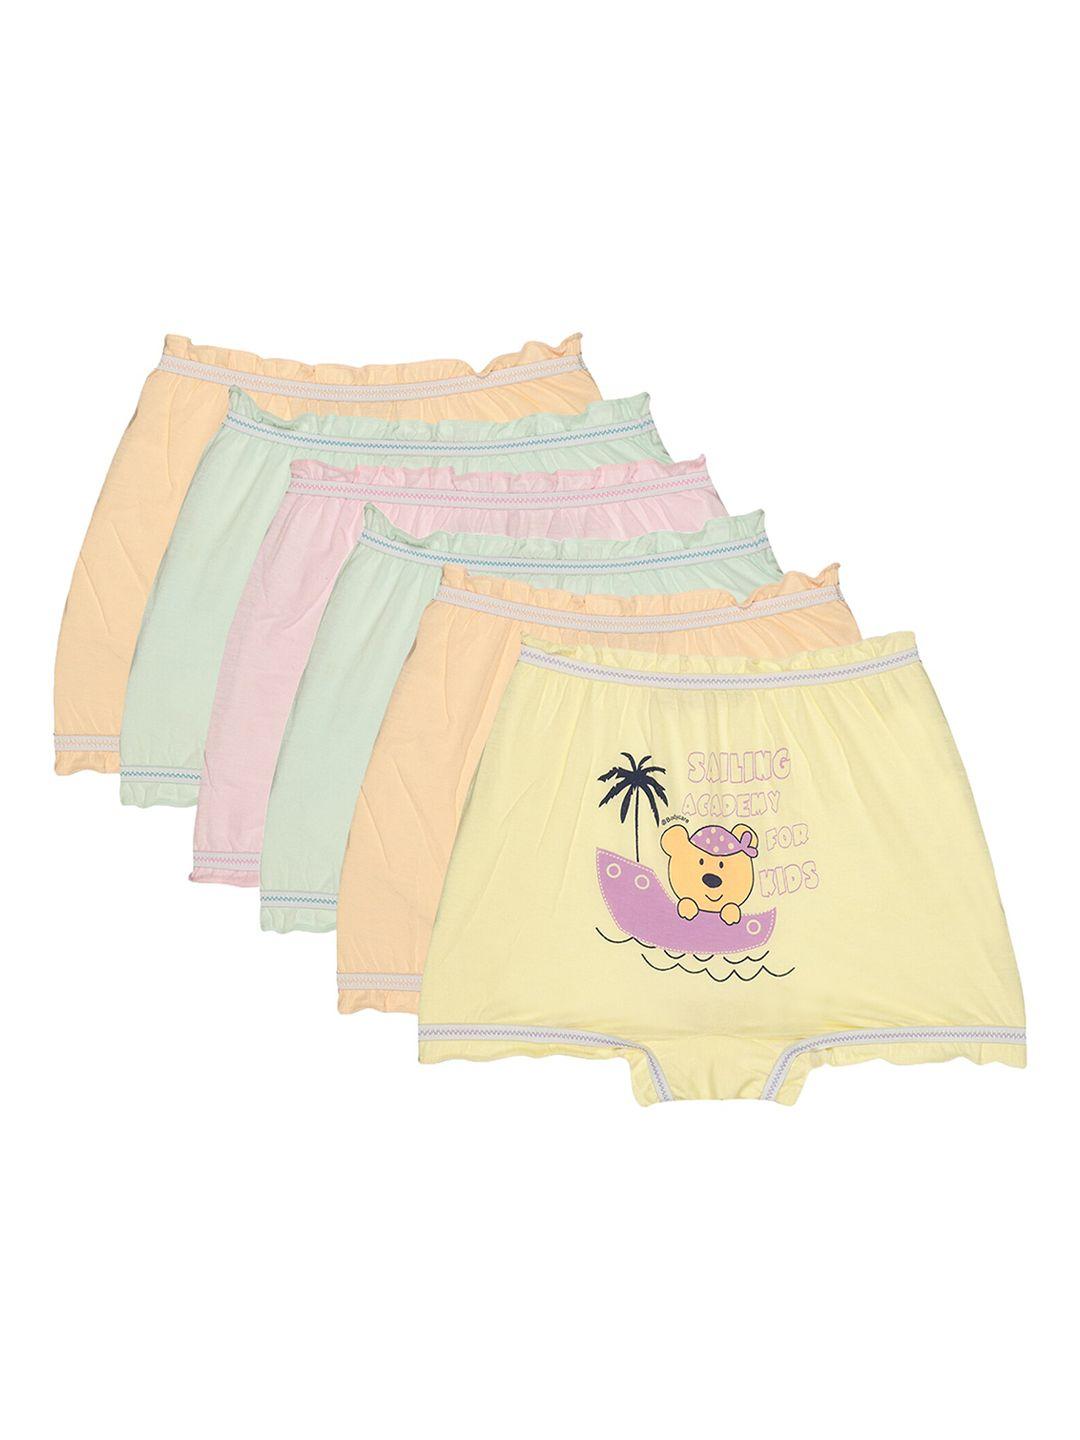 dyca kids pack of 6 assorted printed cotton boxer style briefs dia705-pk001_p6